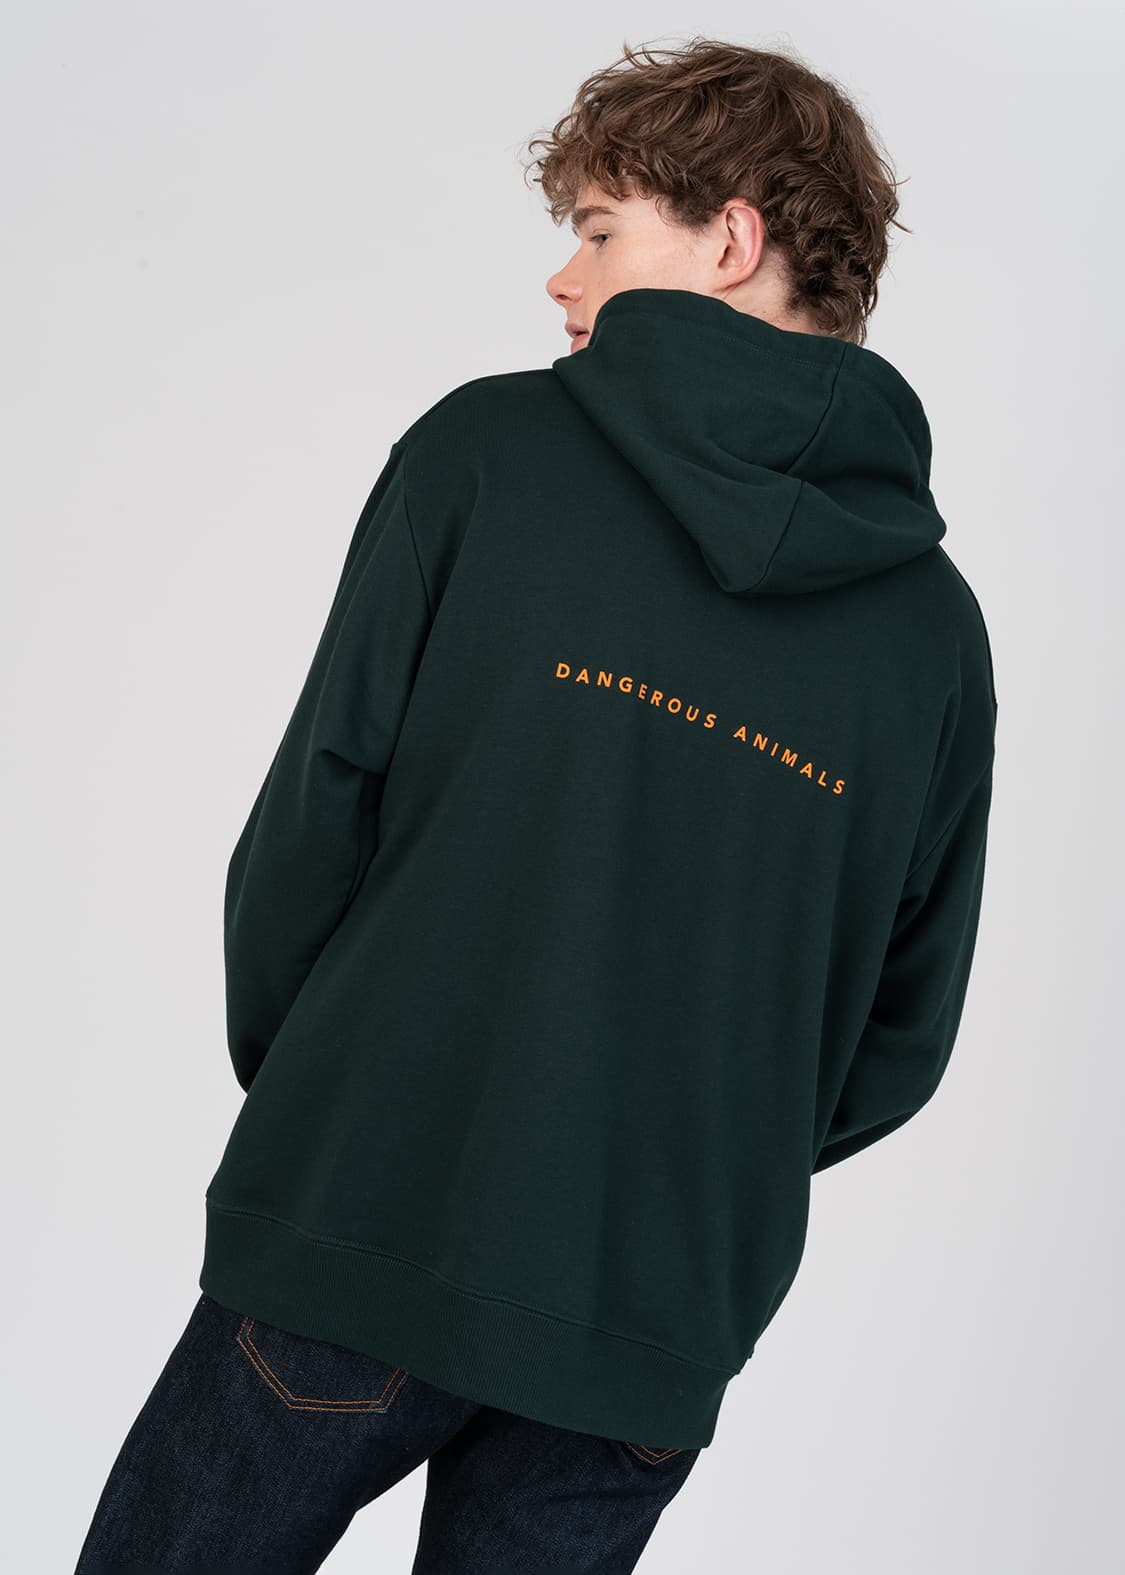 Embroidery Long Sleeve Parka (Dangerous Animals)